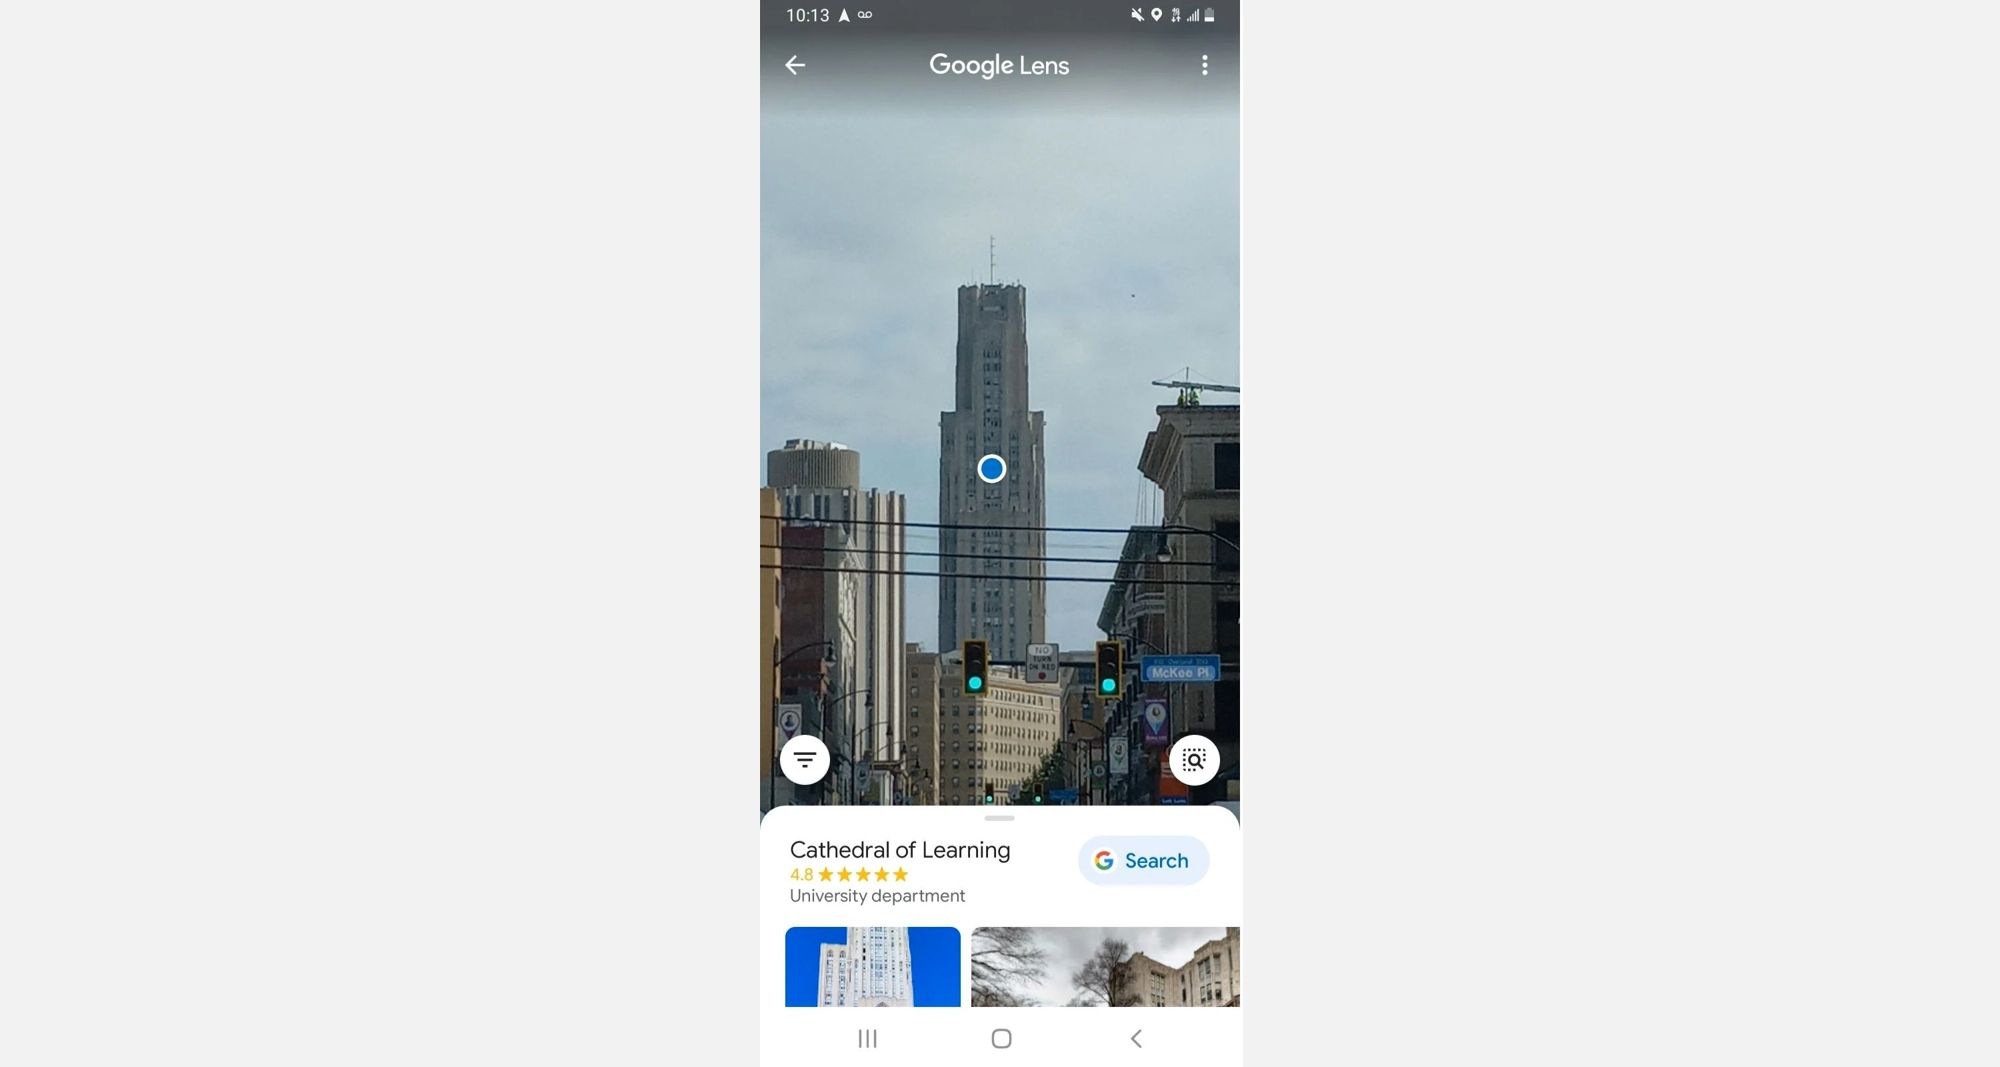 The Google Lens app can identify any building.